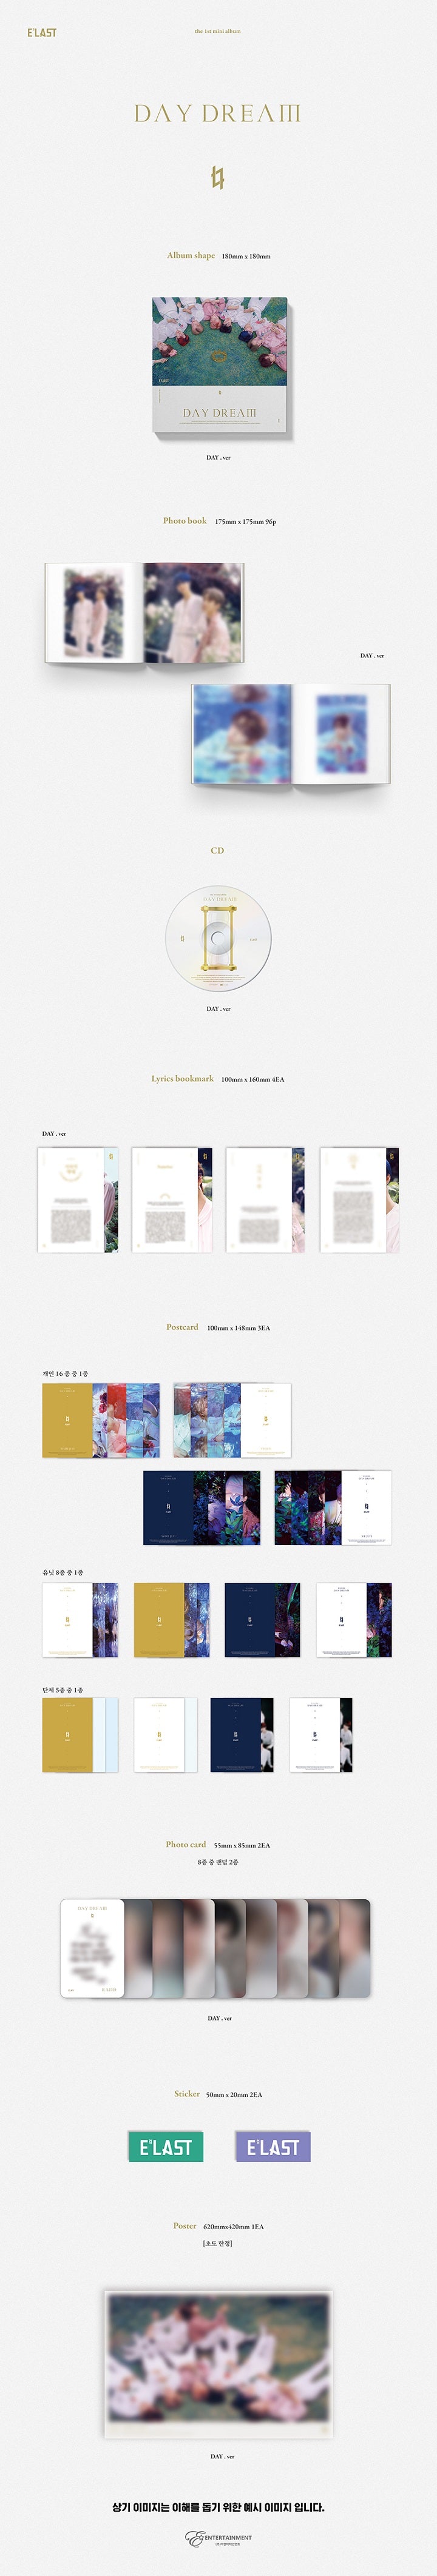 1 CD
1 Photo Book (96 pages)
4 Lyrics Bookmarks
3 Posts
2 Photo Cards
2 Stickers